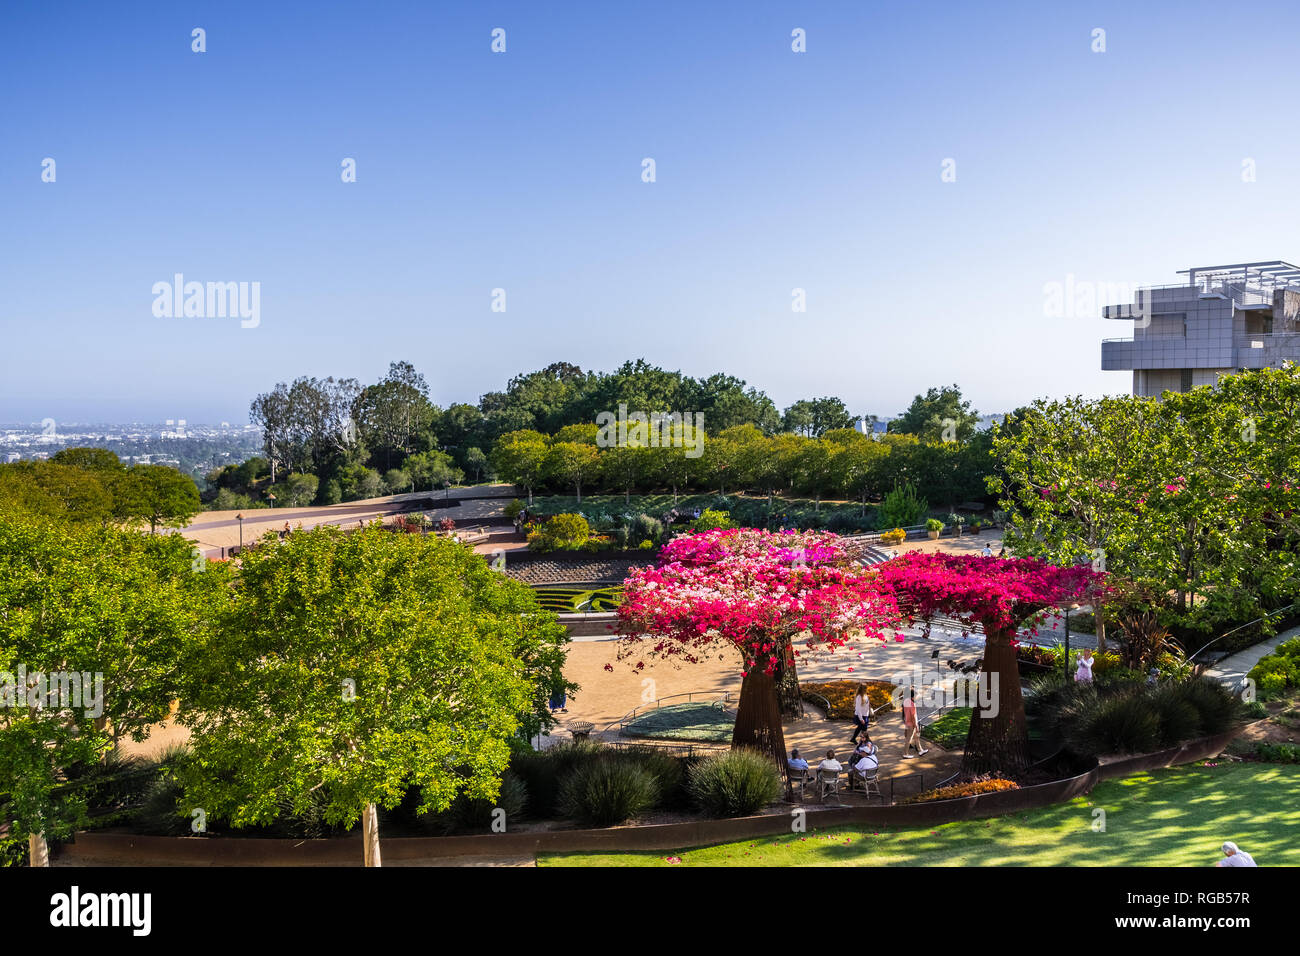 June 8, 2018 Los Angeles / CA / USA - Robert Irwin's Central Garden at Getty Center Stock Photo